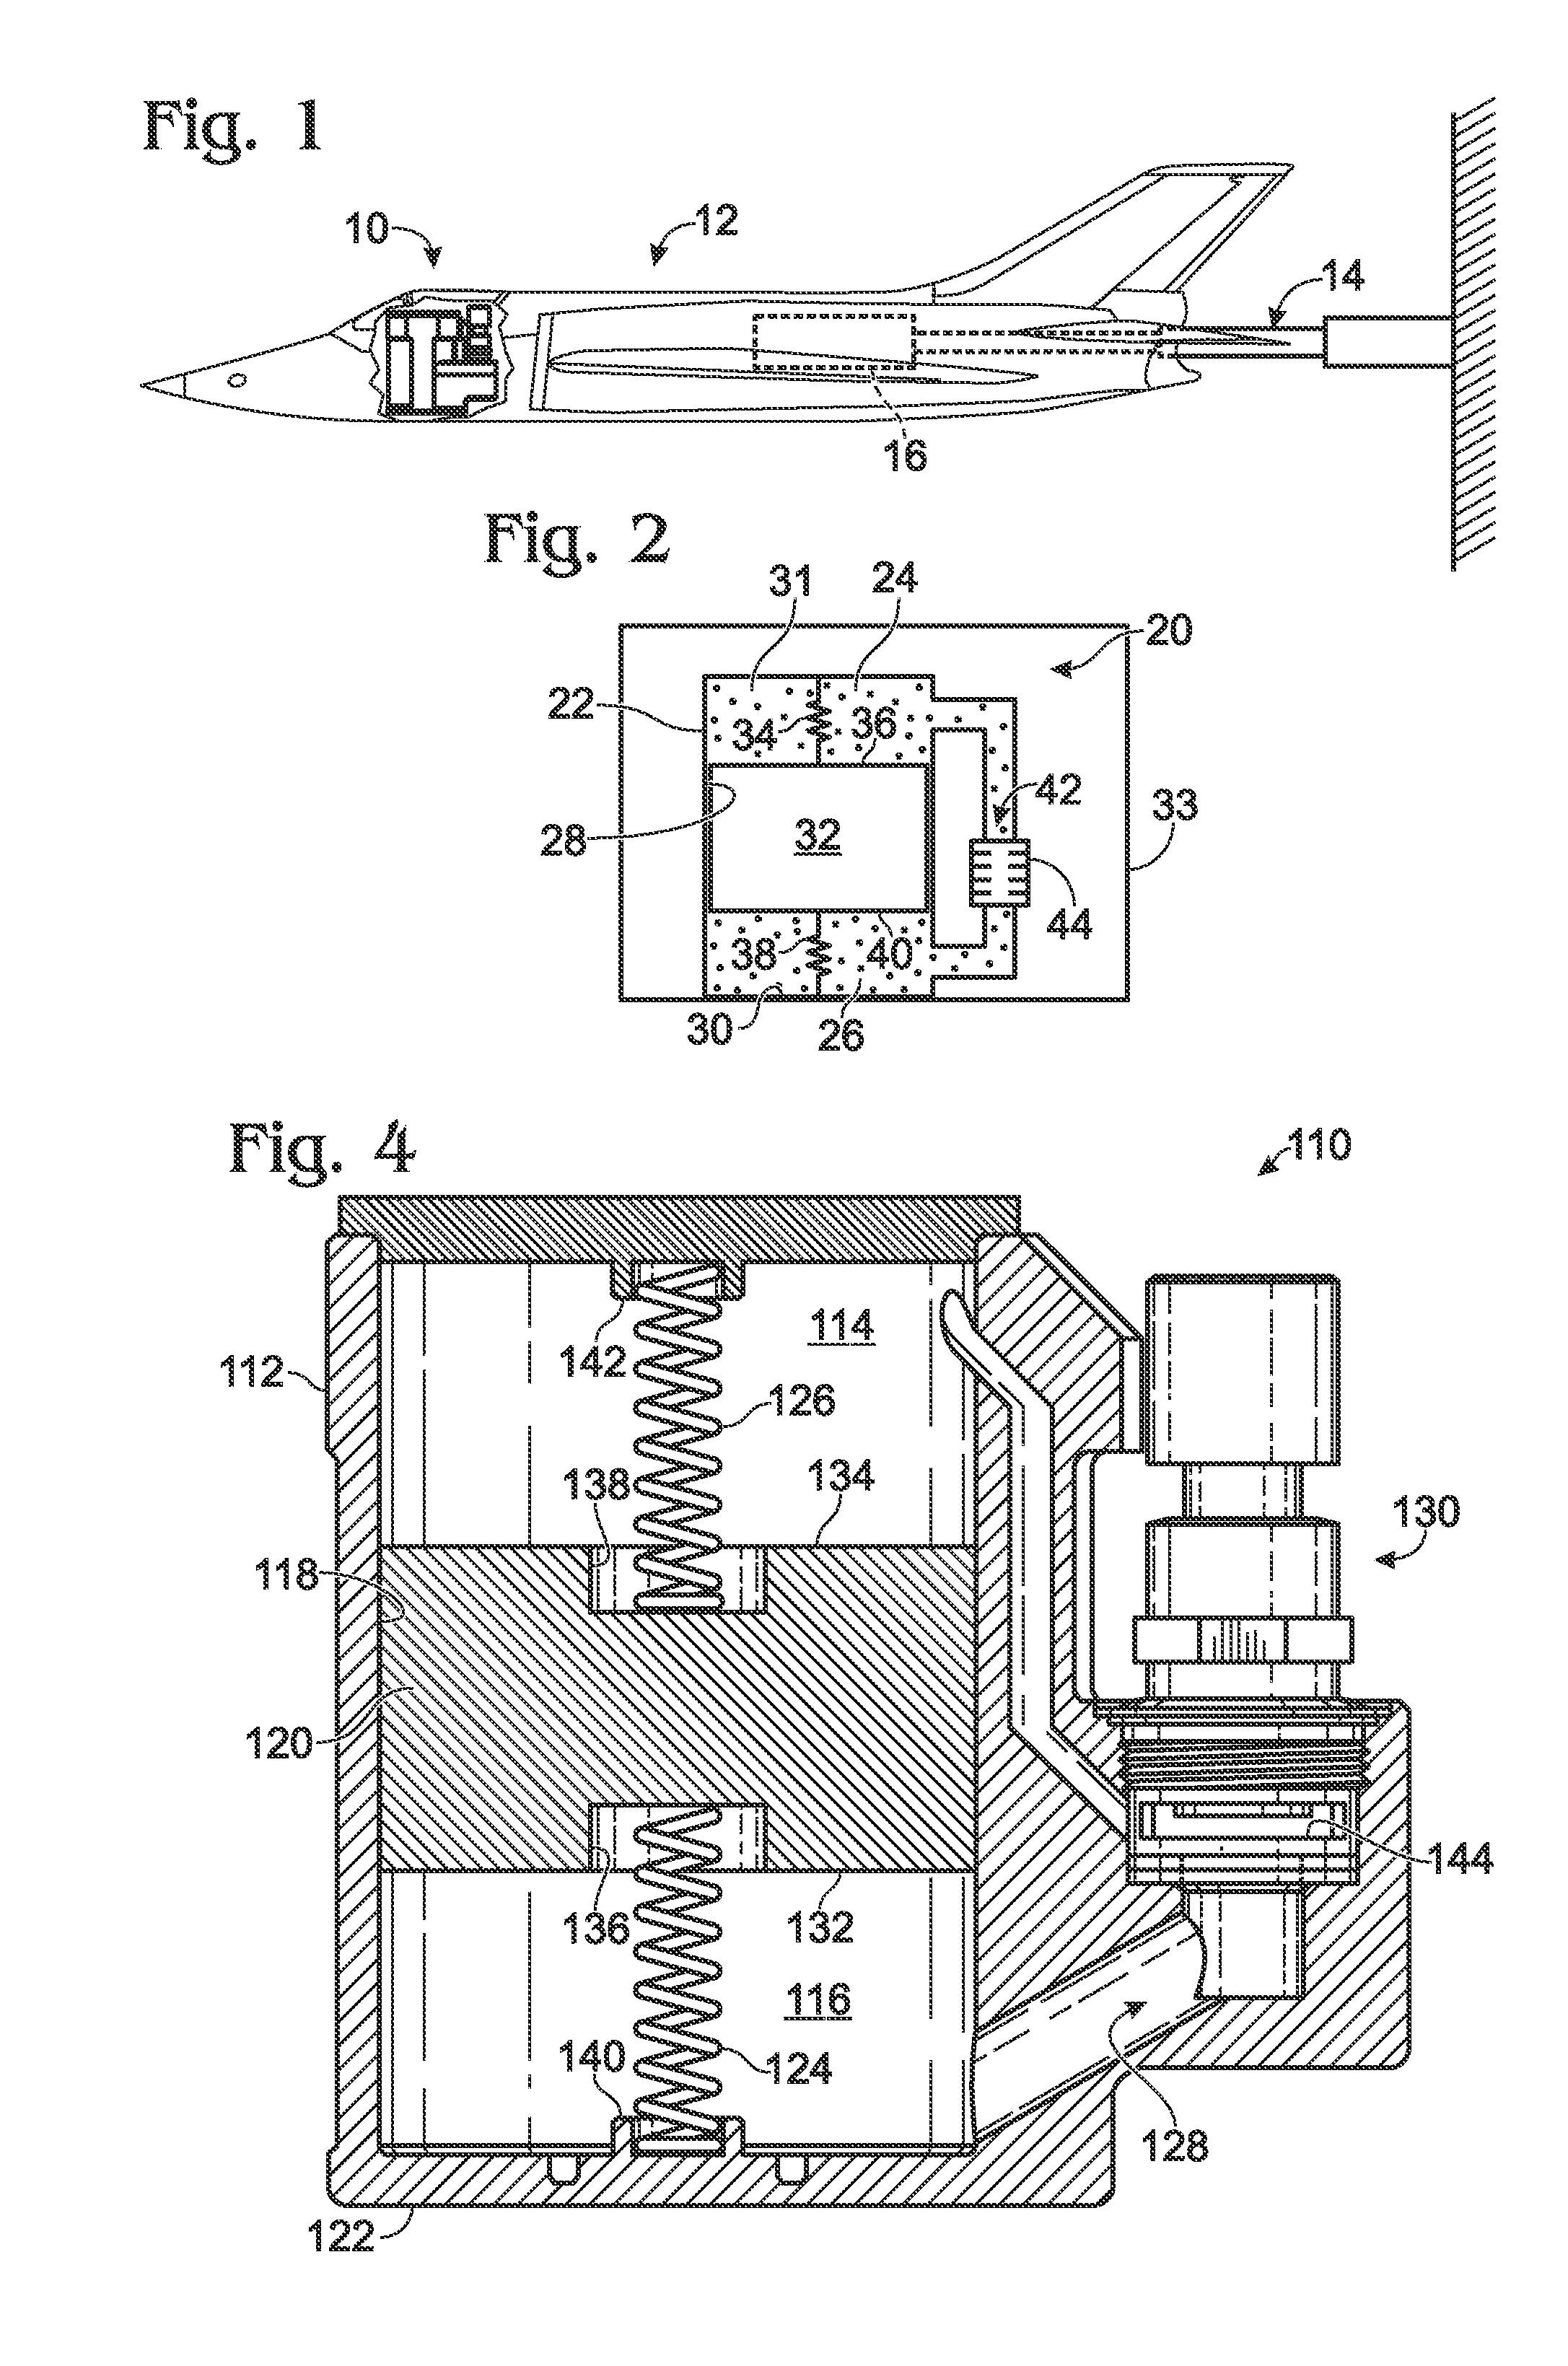 Translational tuned mass damper with continuously adjustable damping characteristics for application to high speed wind tunnel testing